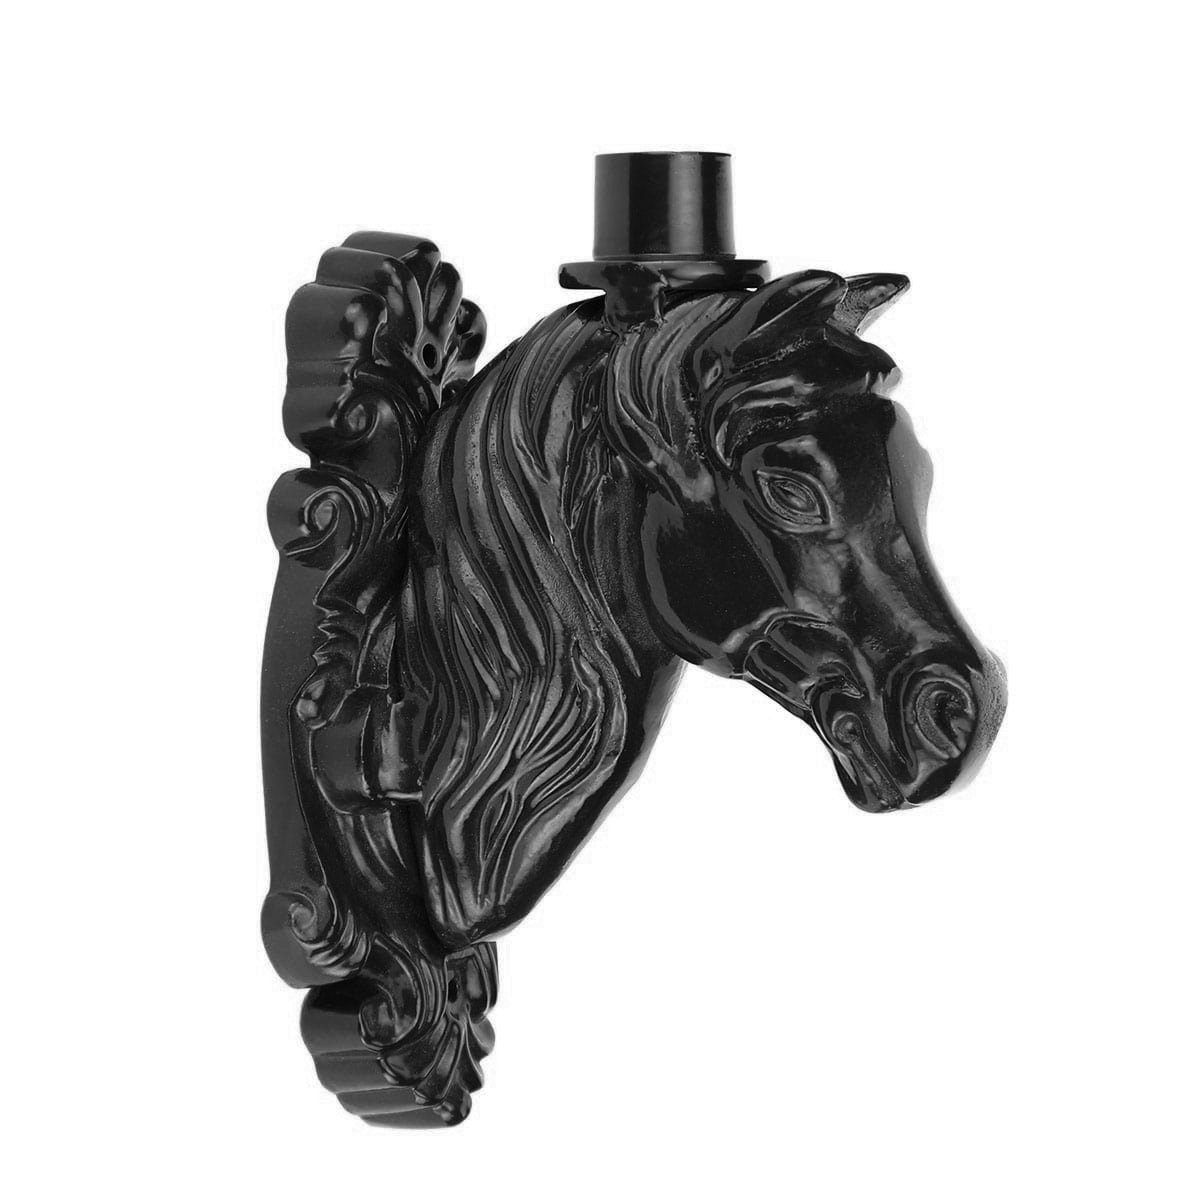 Outdoor Lighting Classic Rural Wall support Horse ornament WA73 - 32 cm